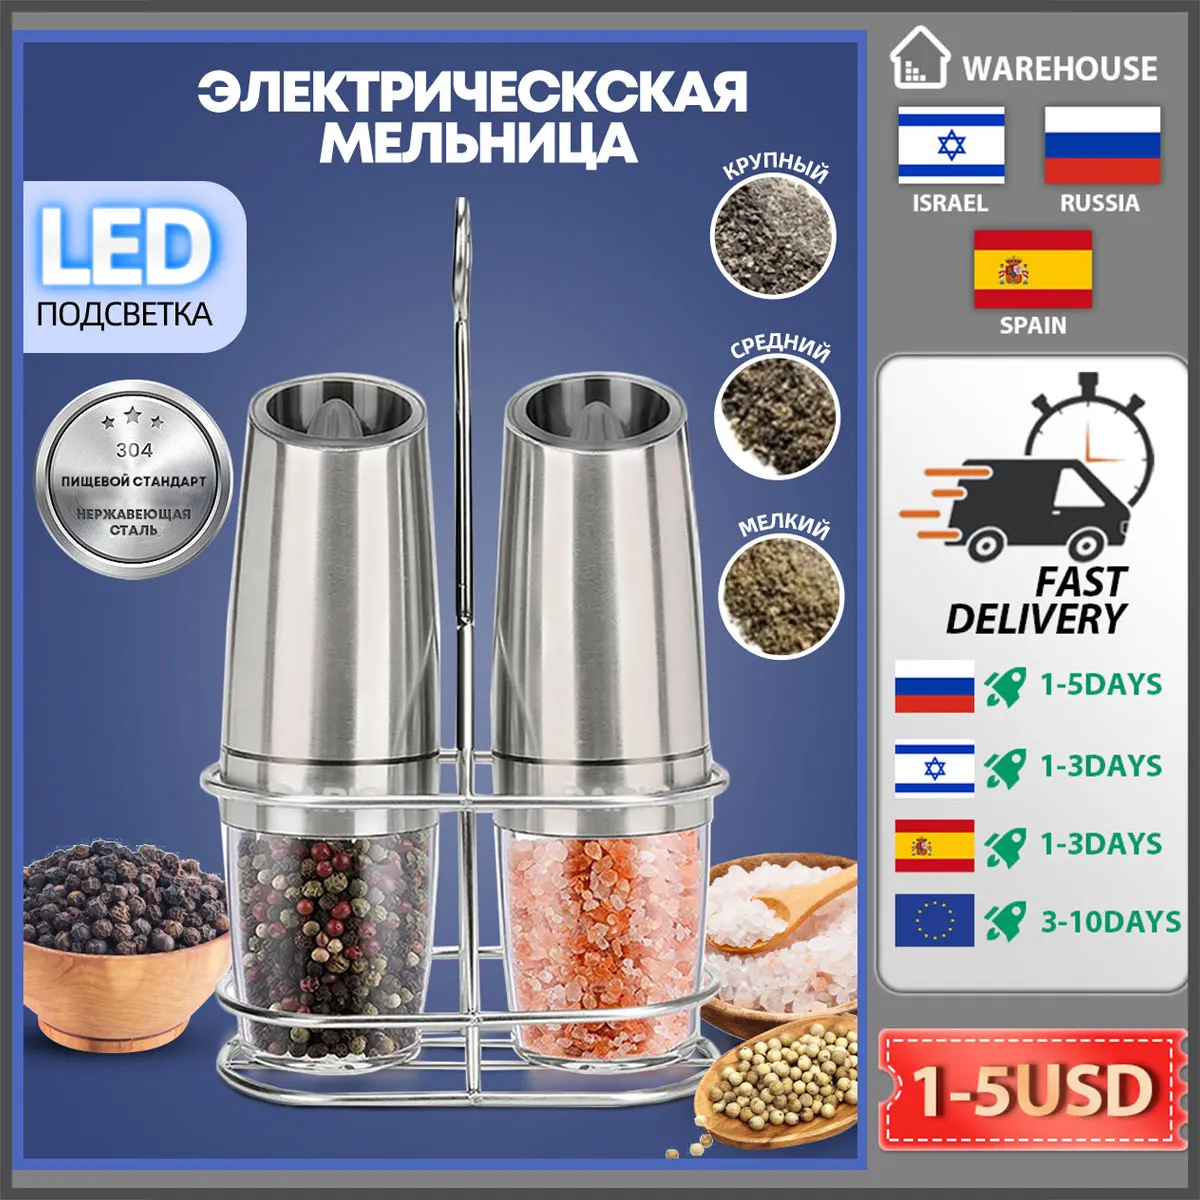 https://ae01.alicdn.com/kf/Sf6ba00b471e44a1586f06c4842812ae5r/Electric-Salt-and-Pepper-Grinder-Stainless-Steel-Automatic-Gravity-Induction-Pepper-Mill-LED-Light-Kitchen-Spice.jpg